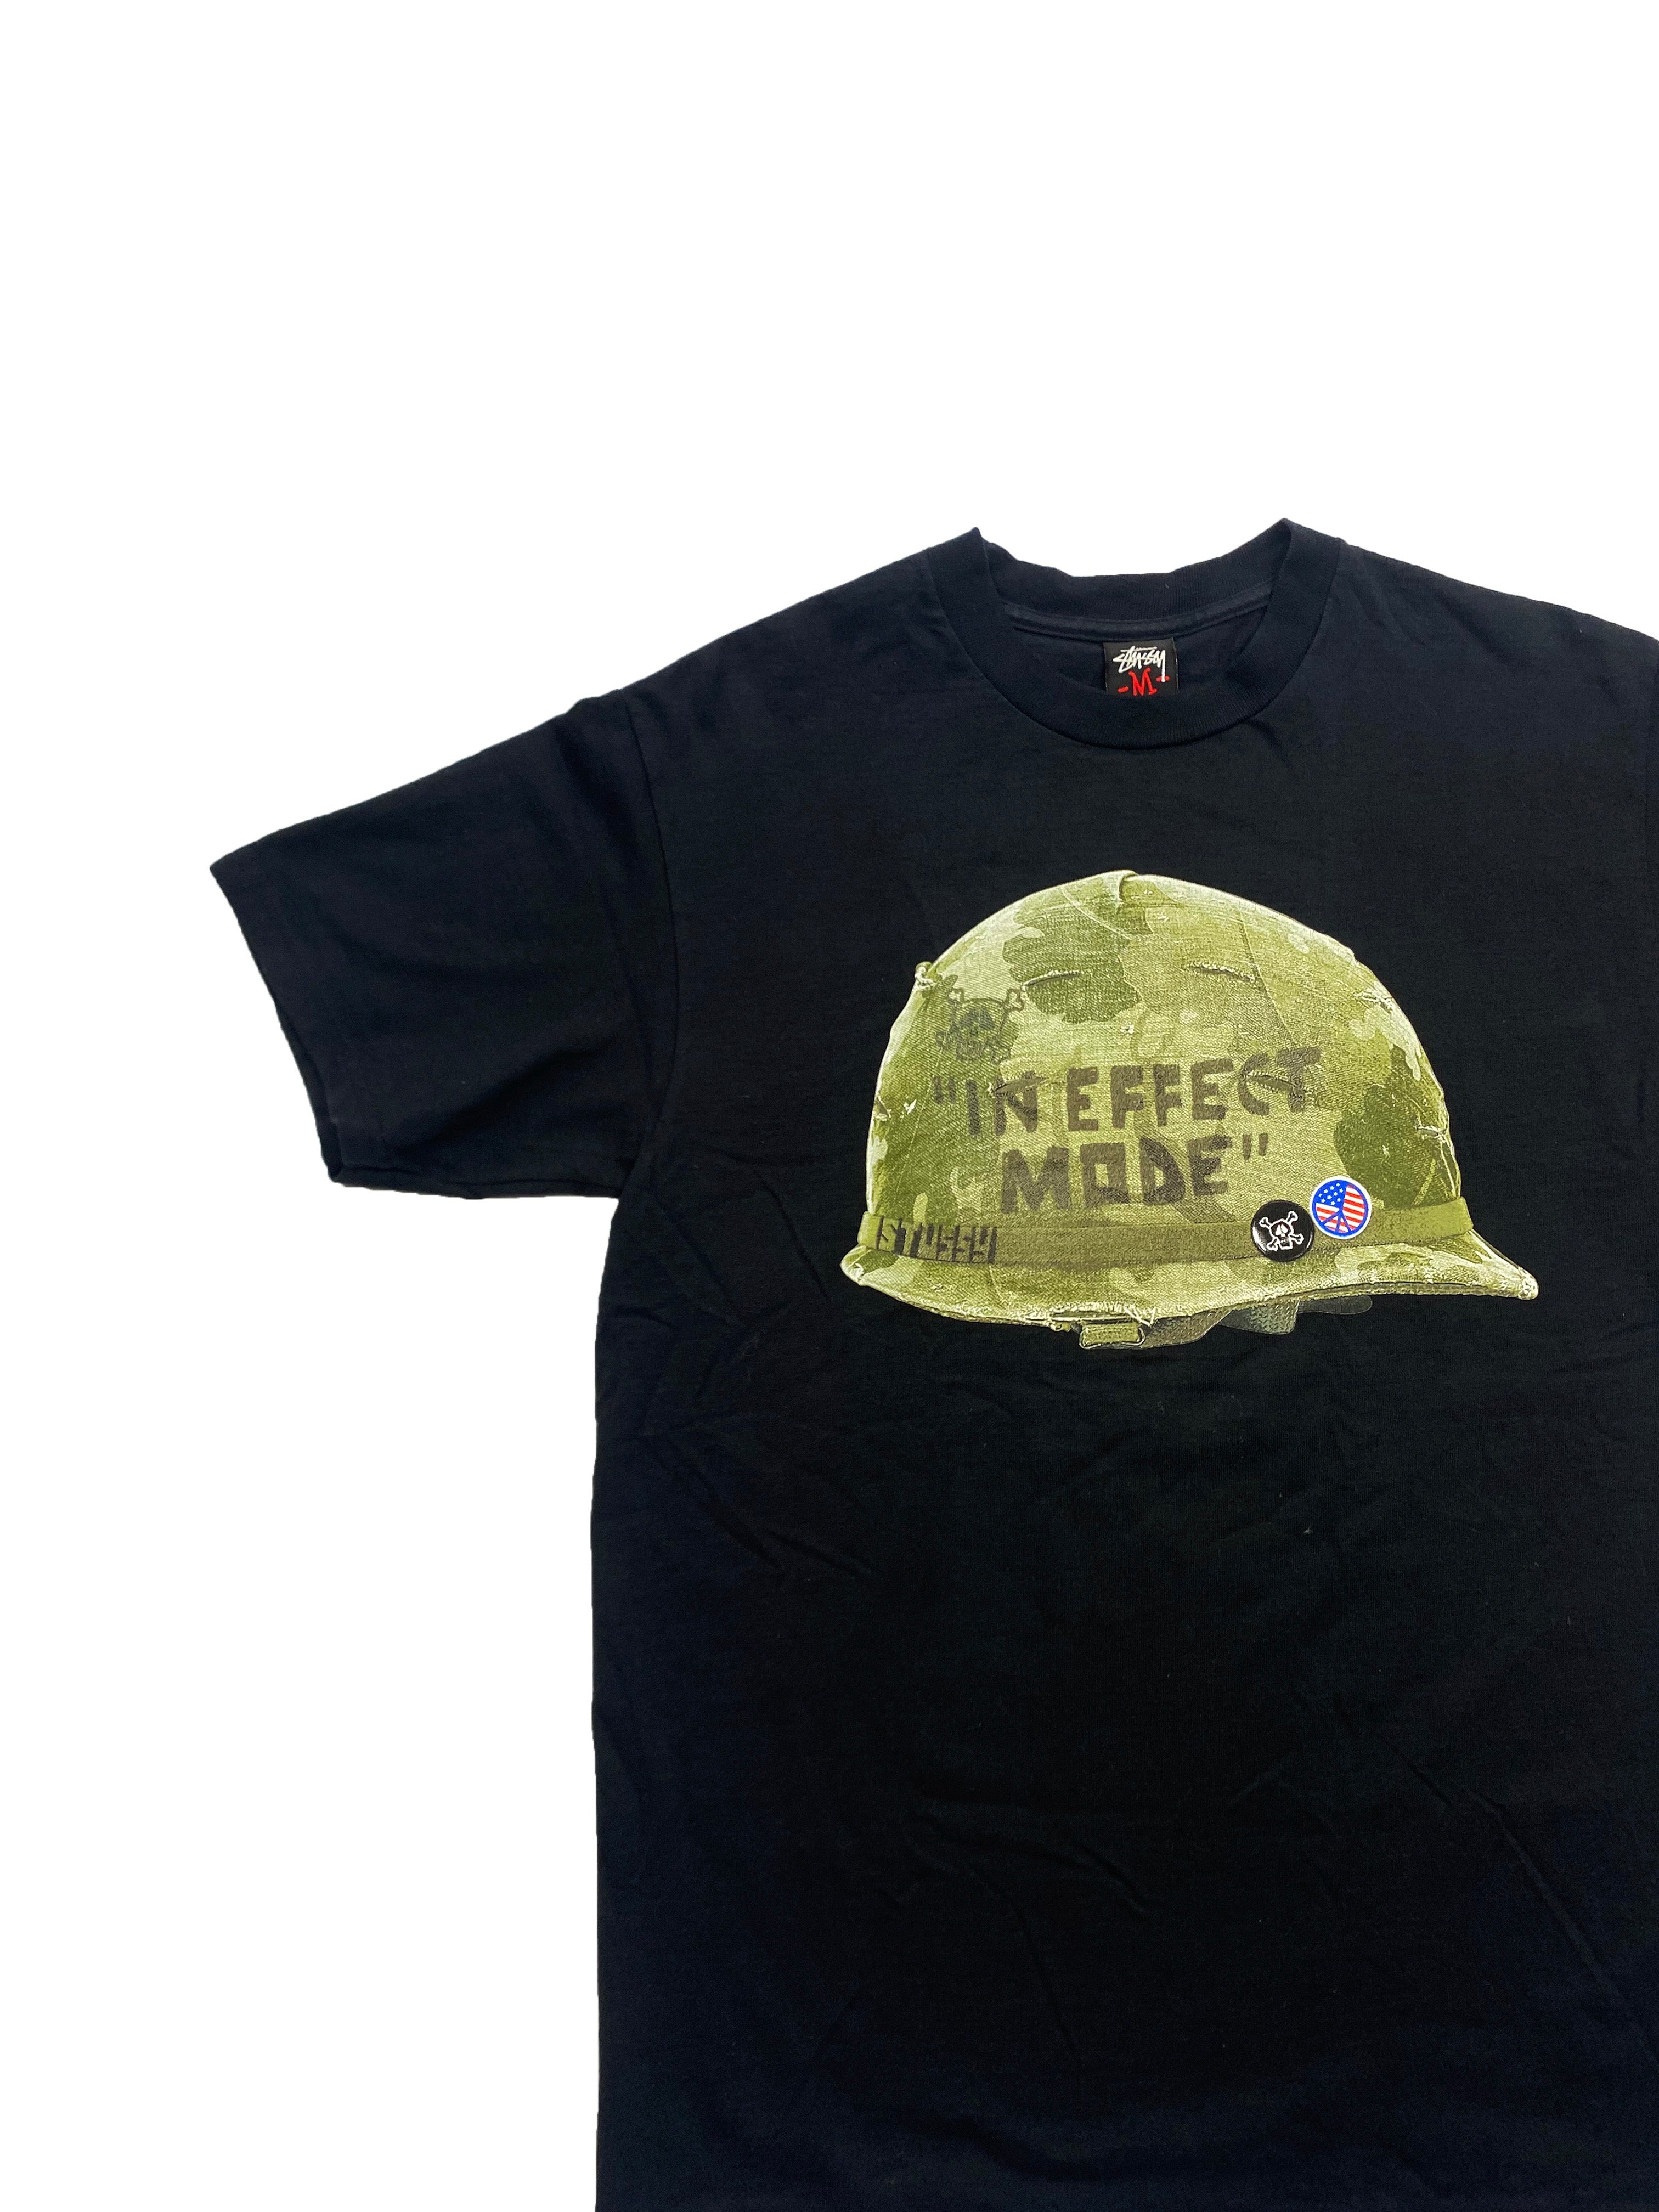 Stussy 'In Effect Made' T-shirt 00's